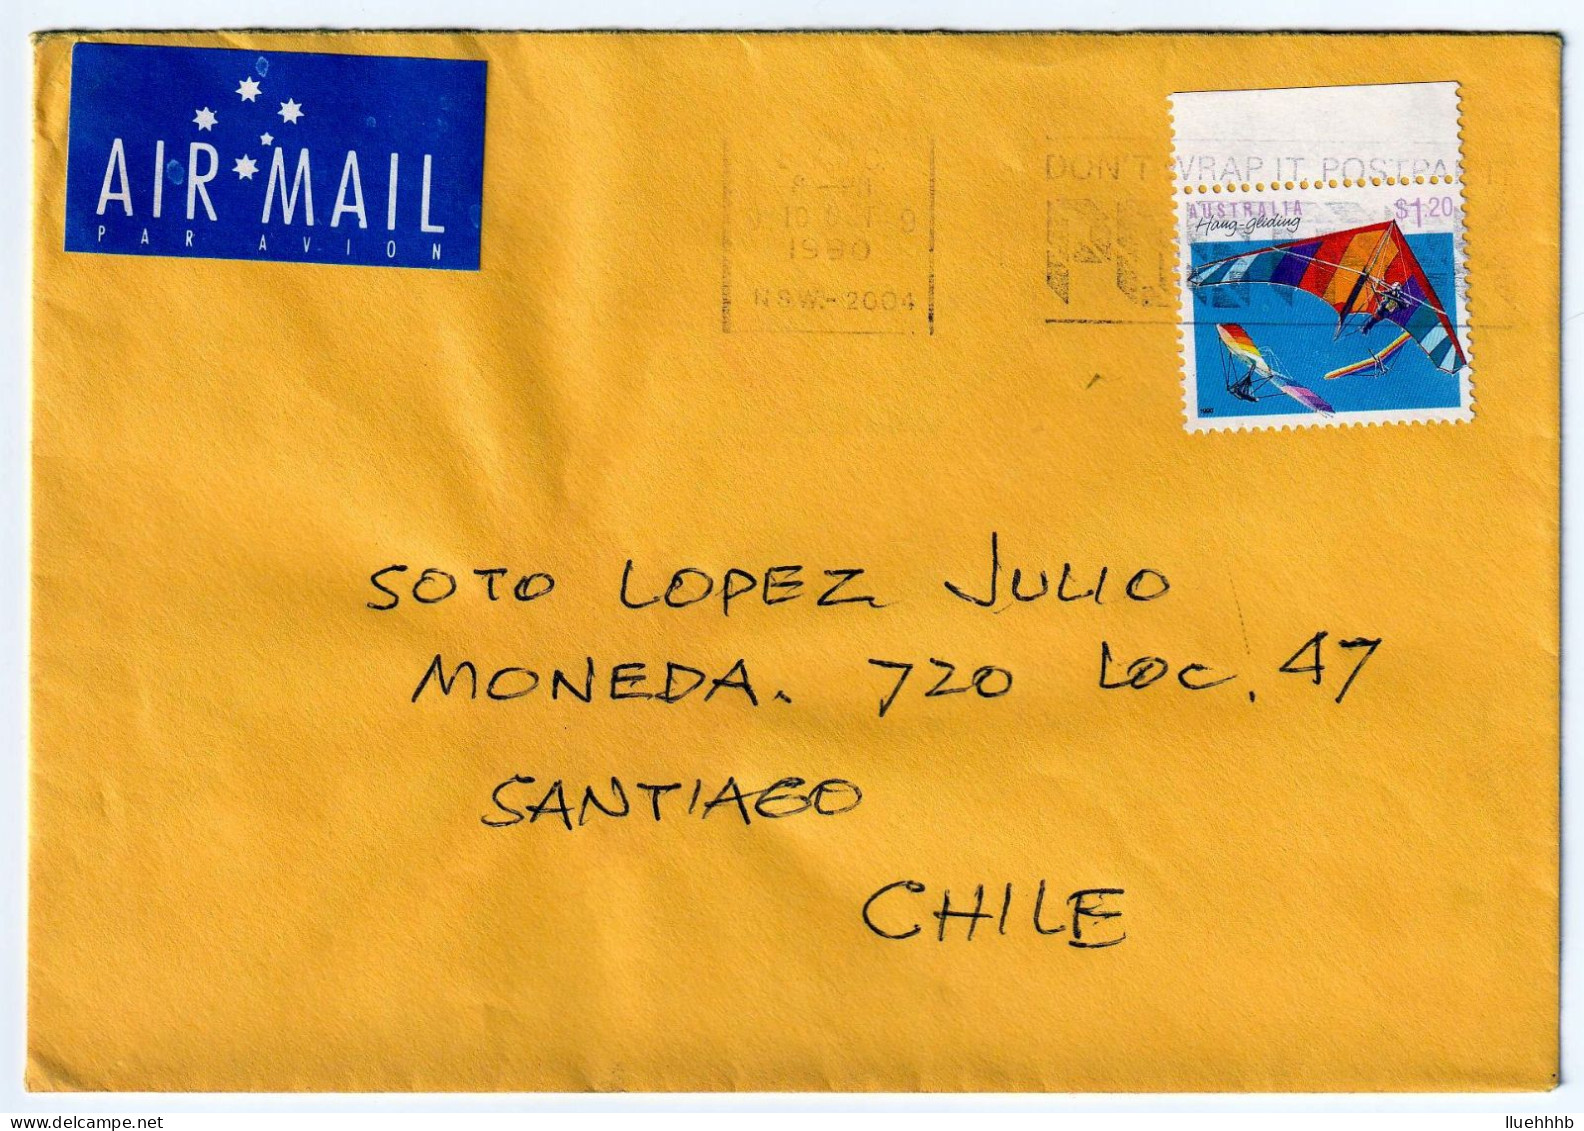 AUSTRALIA: $1.20 Hang Gliding Solo Usage On 1980 Airmail Cover To CHILE - Brieven En Documenten